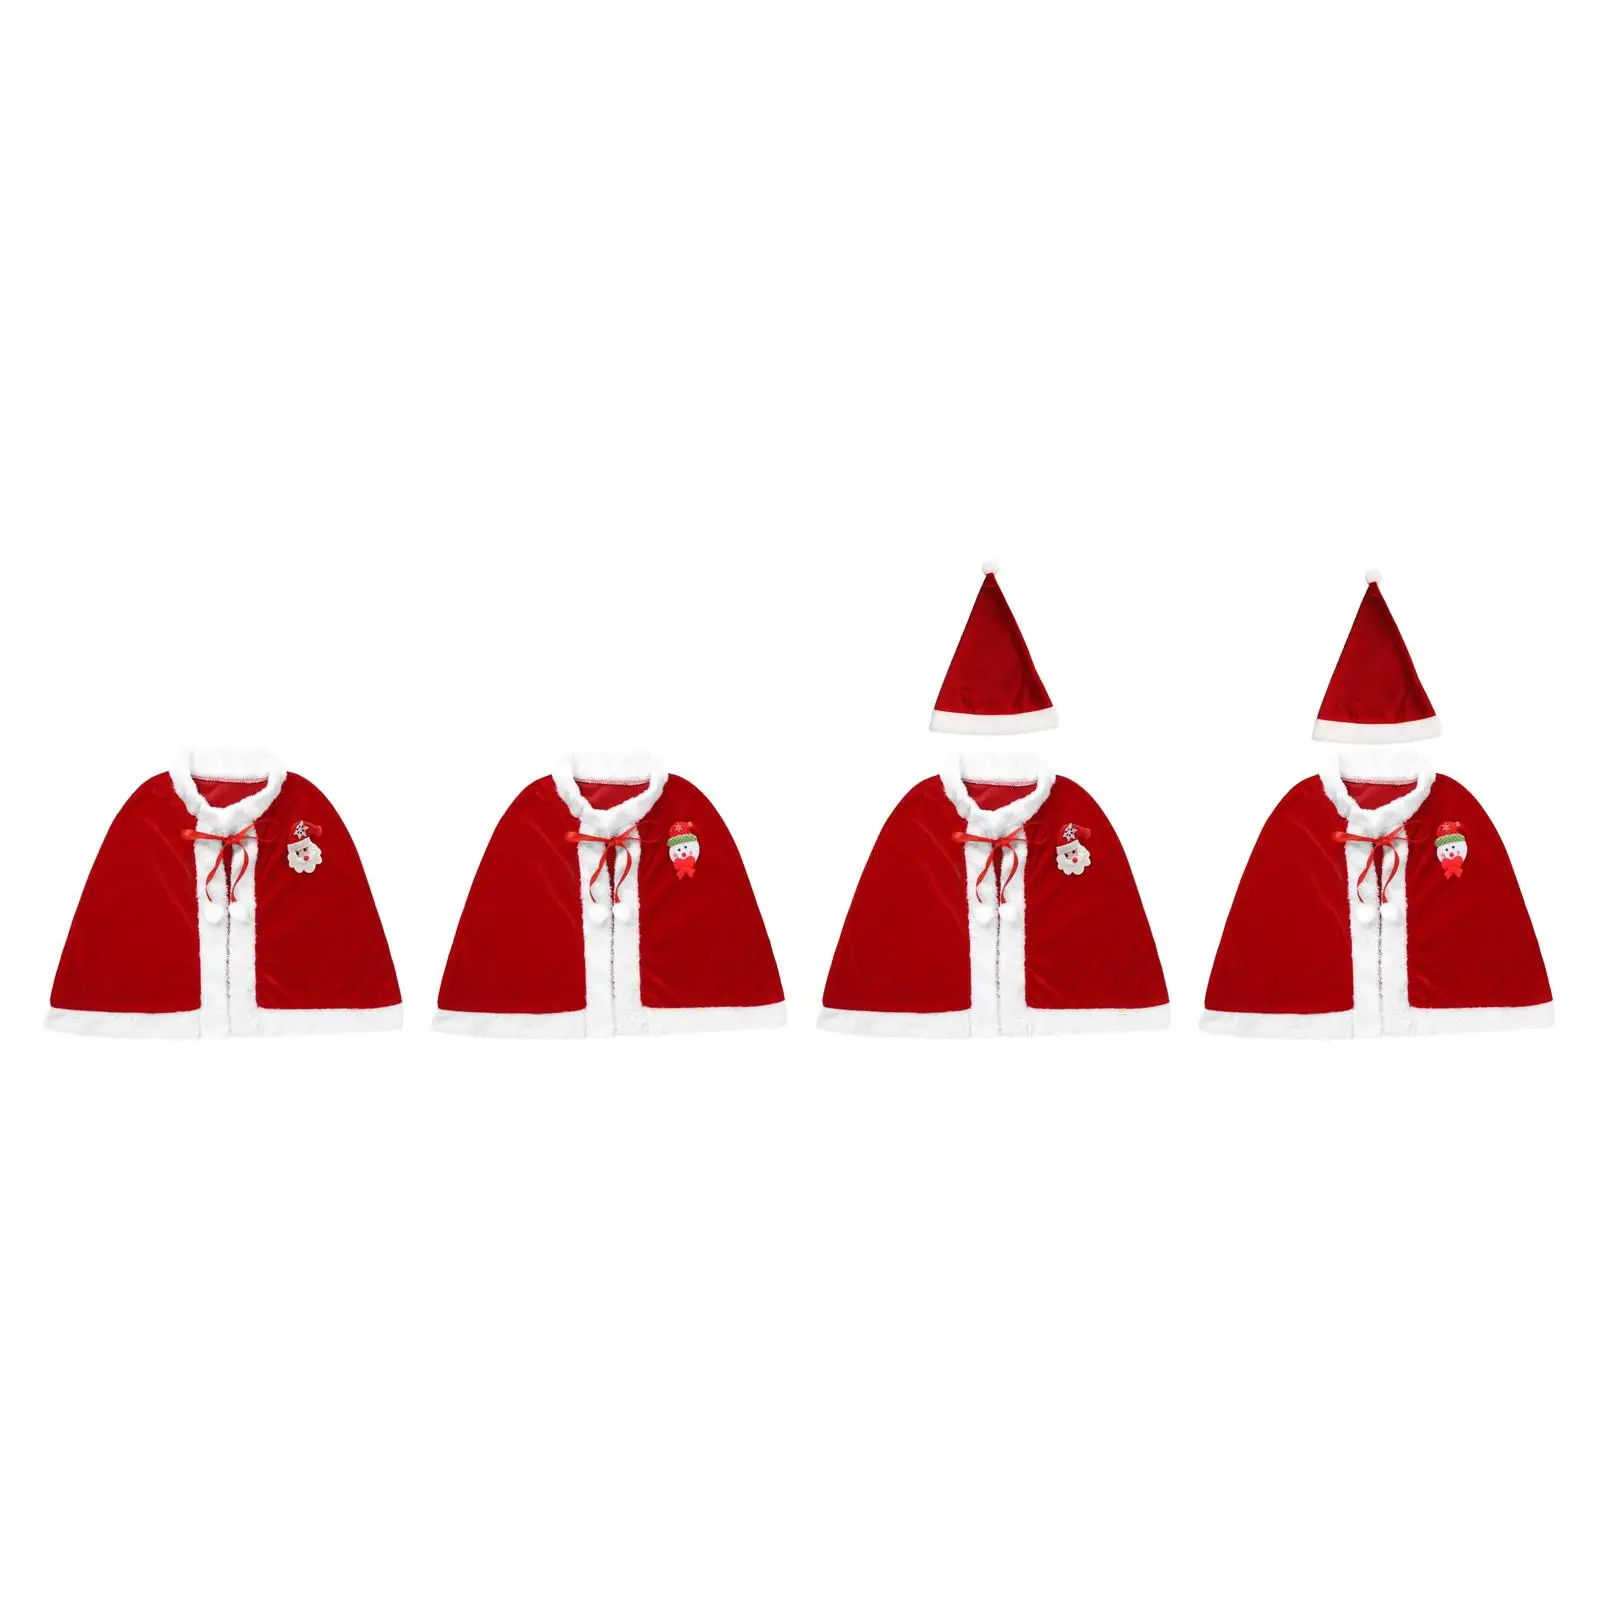 Kids Christmas Cloak Children Cape for Dressing up Roles Play Themed Party